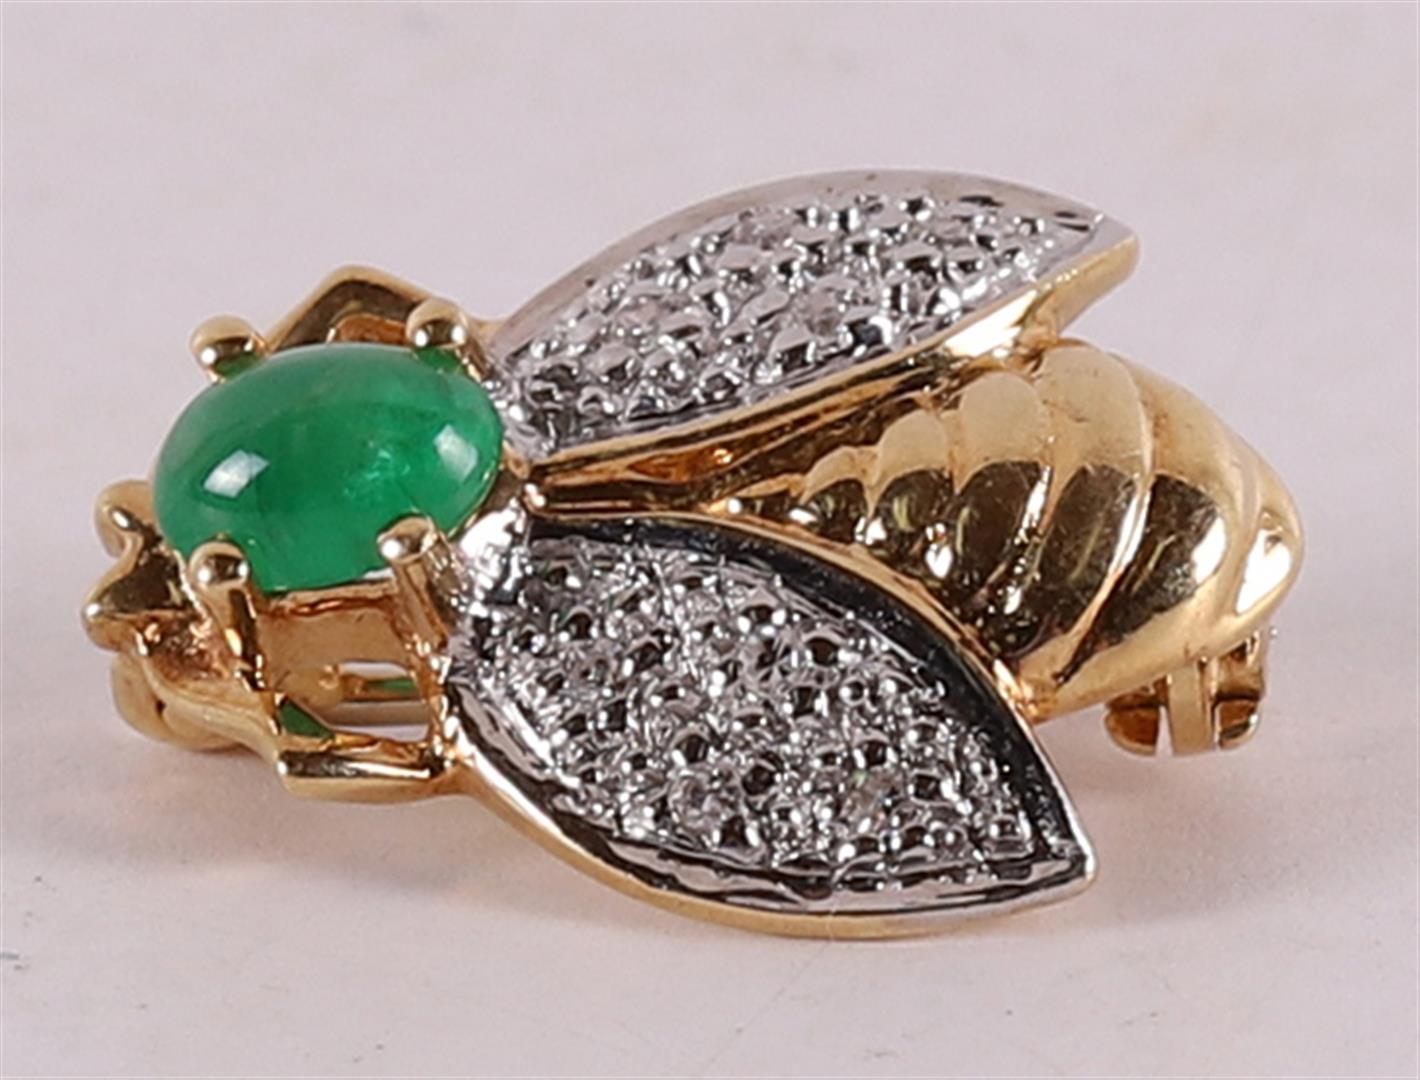 An 18 kt gold brooch in the shape of a bee, with cabochon cut emerald